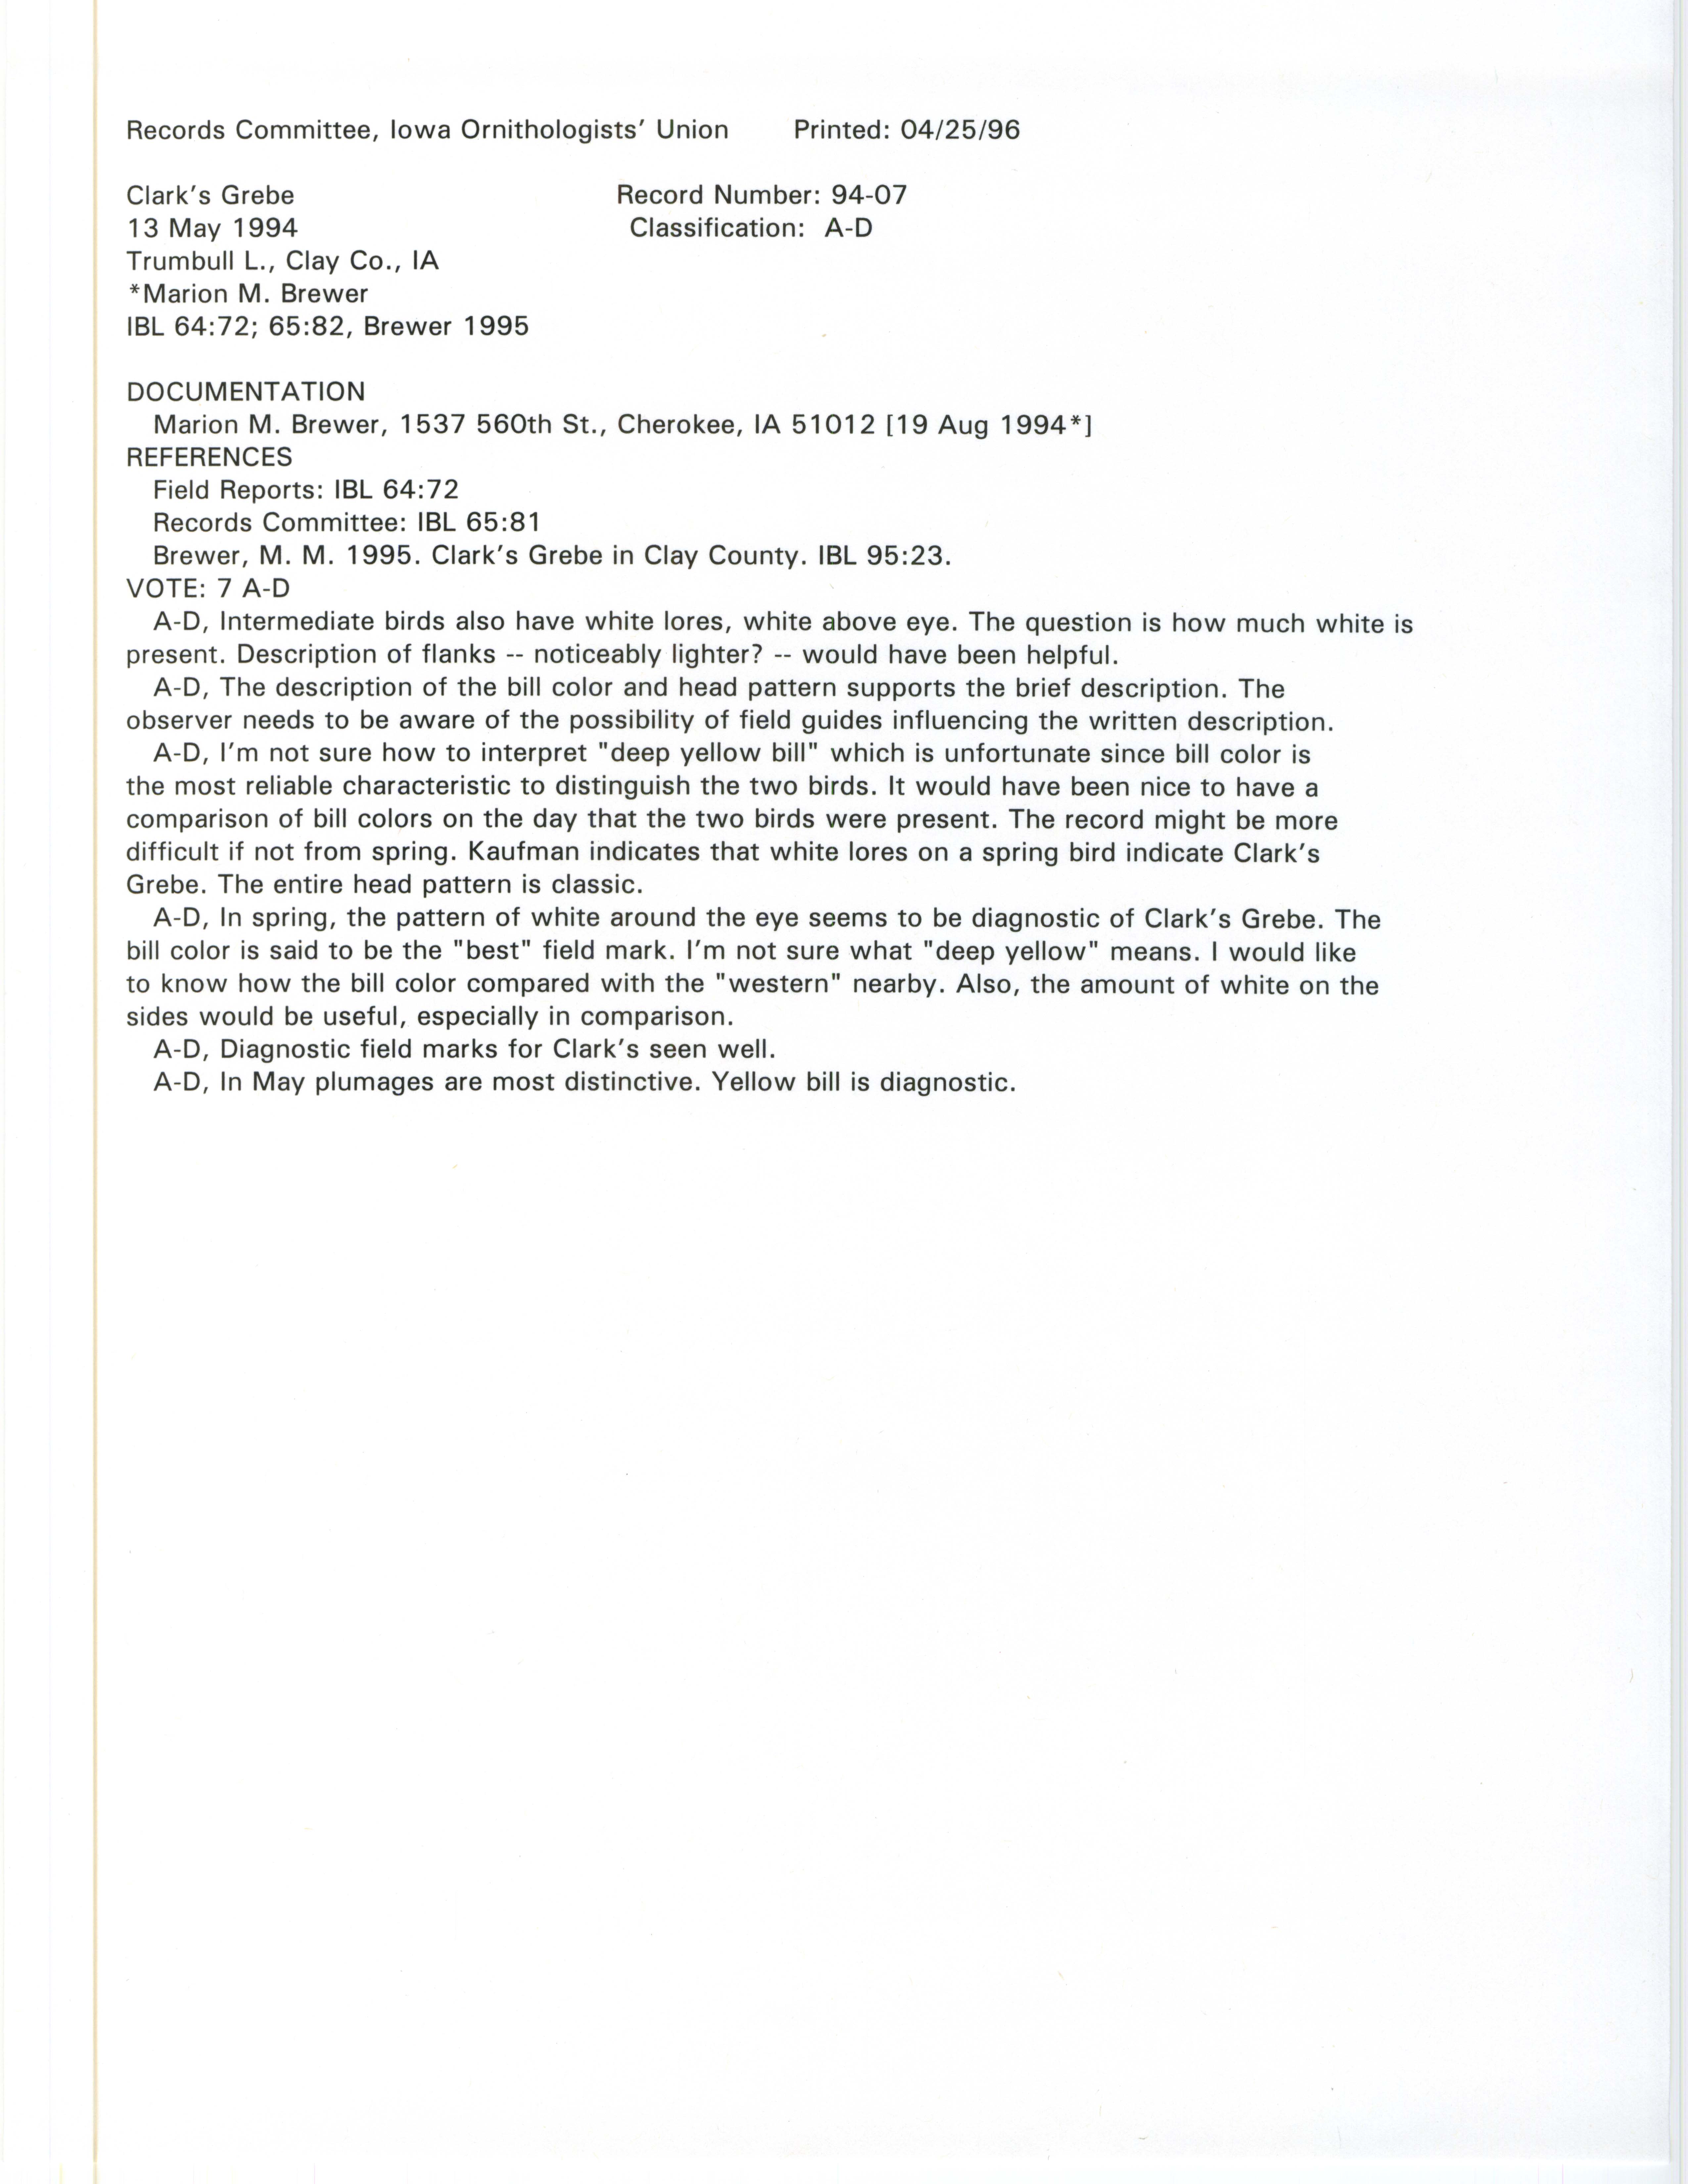 Records Committee review for rare bird sighting of Clark's Grebe at Trumbull Lake, 1994